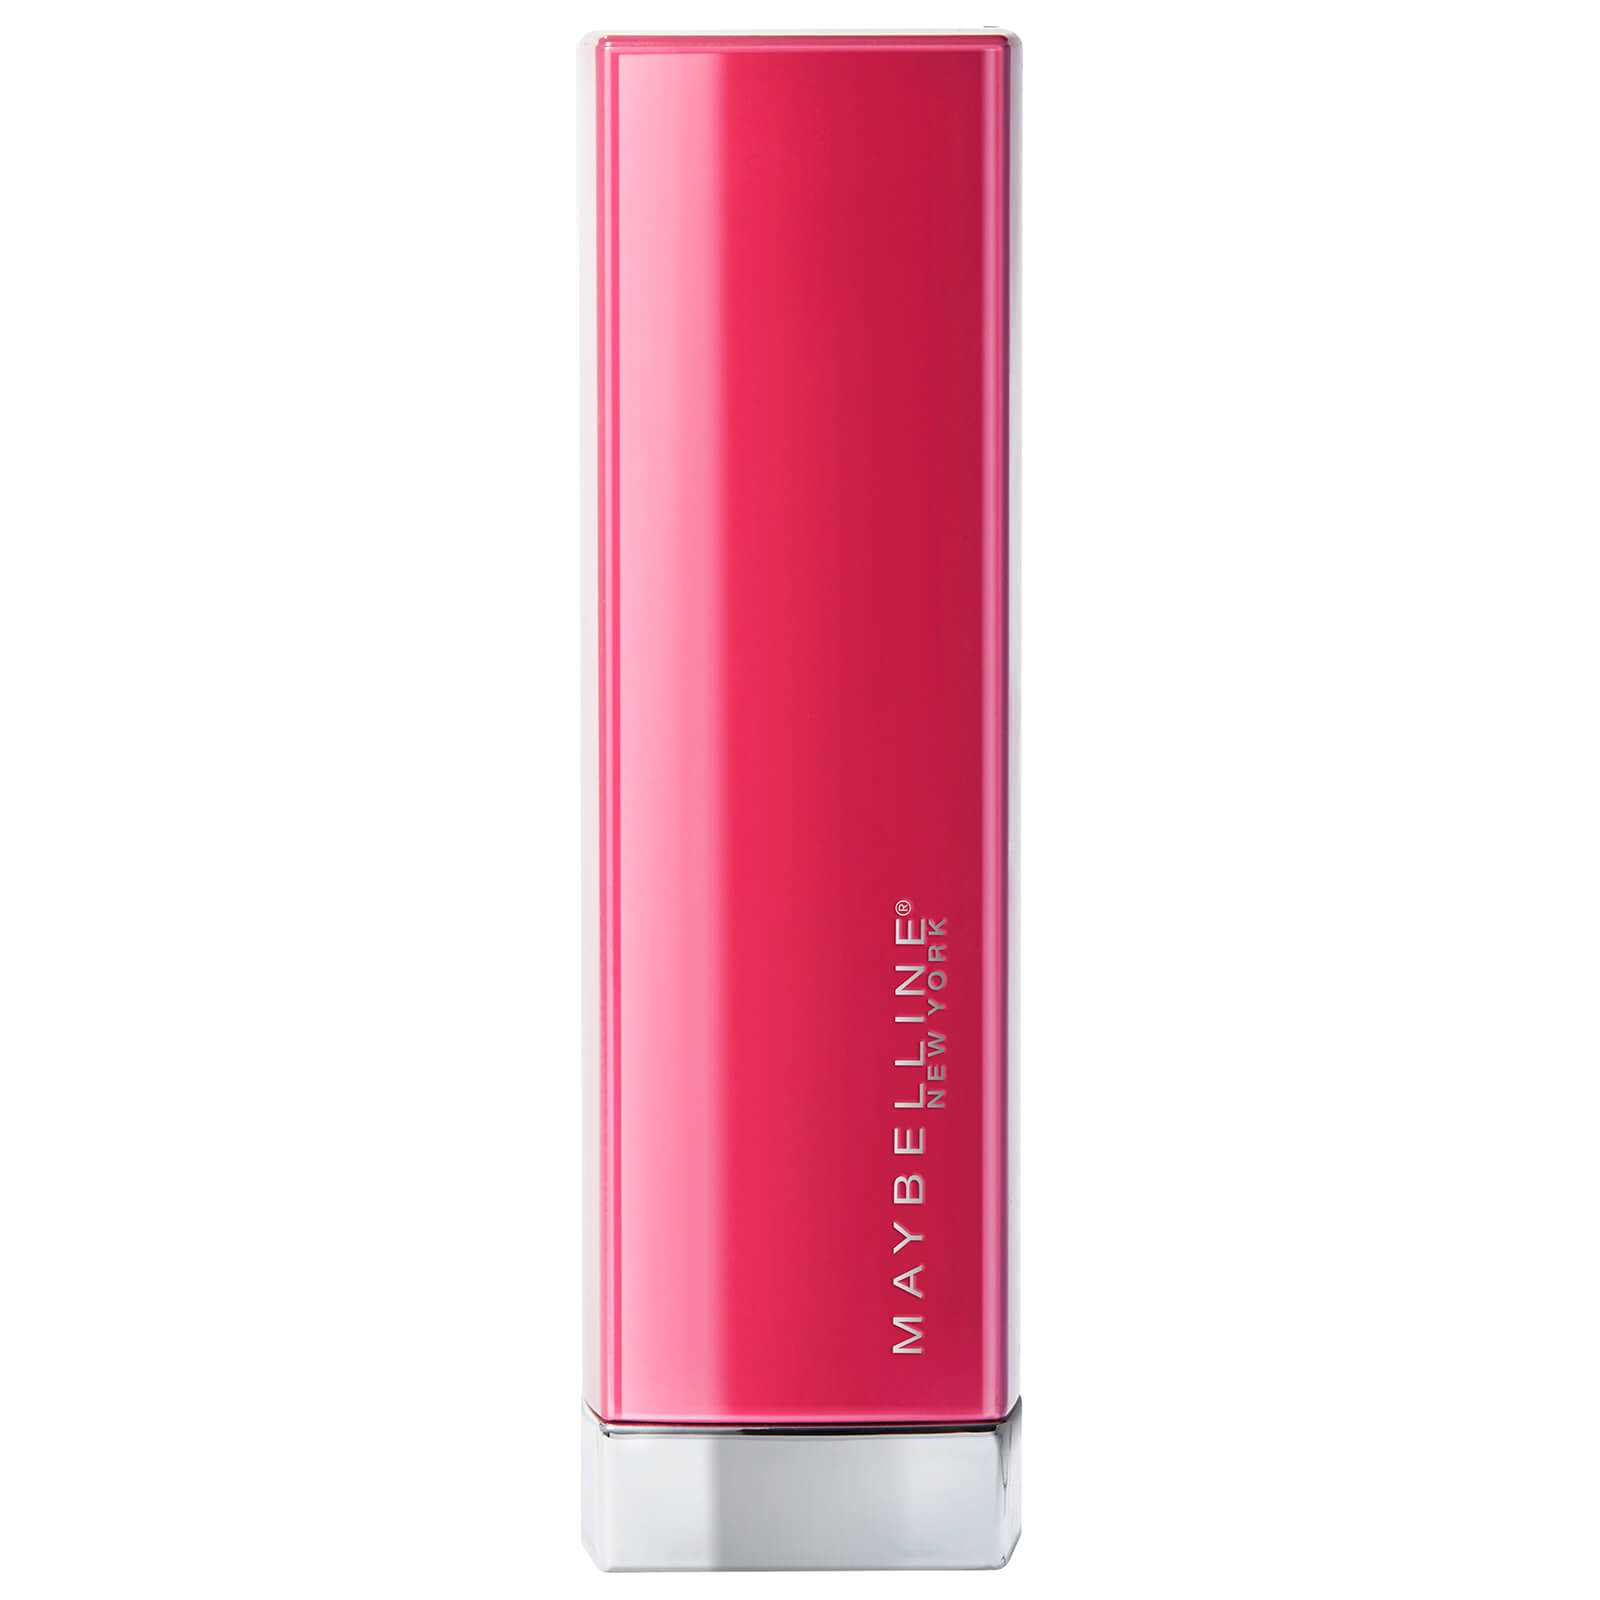 Maybelline Color Sensational Made for All Lipstick 4.2g (Various Shades) - 379 Fuchsia for me